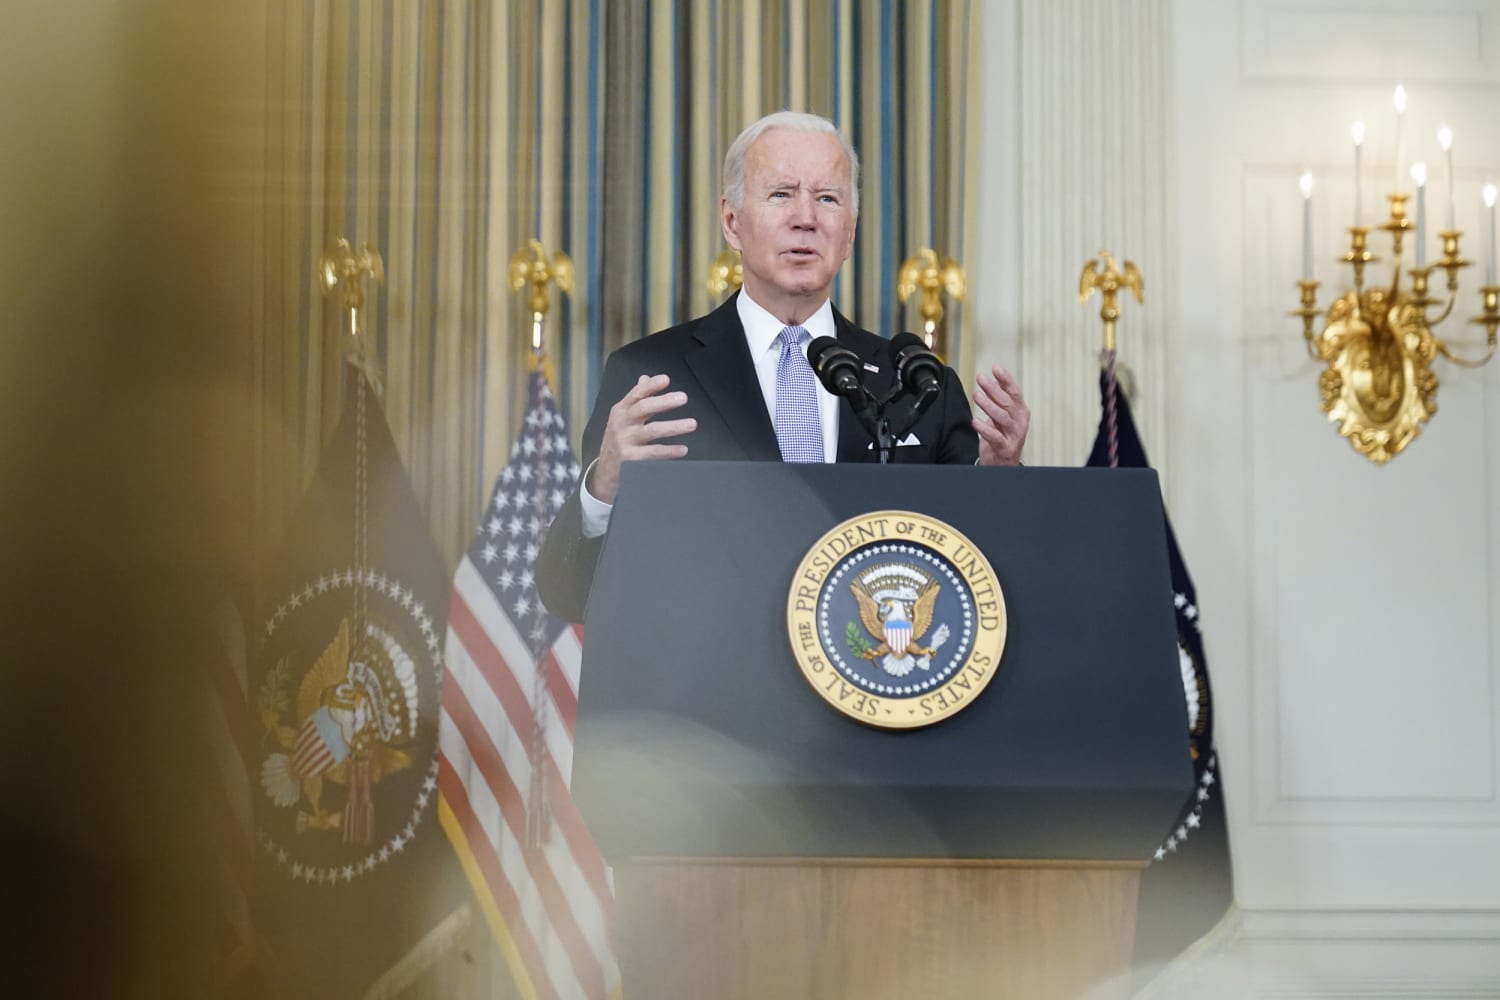 Biden fulfilled a major campaign promise. Can his party reap political reward?